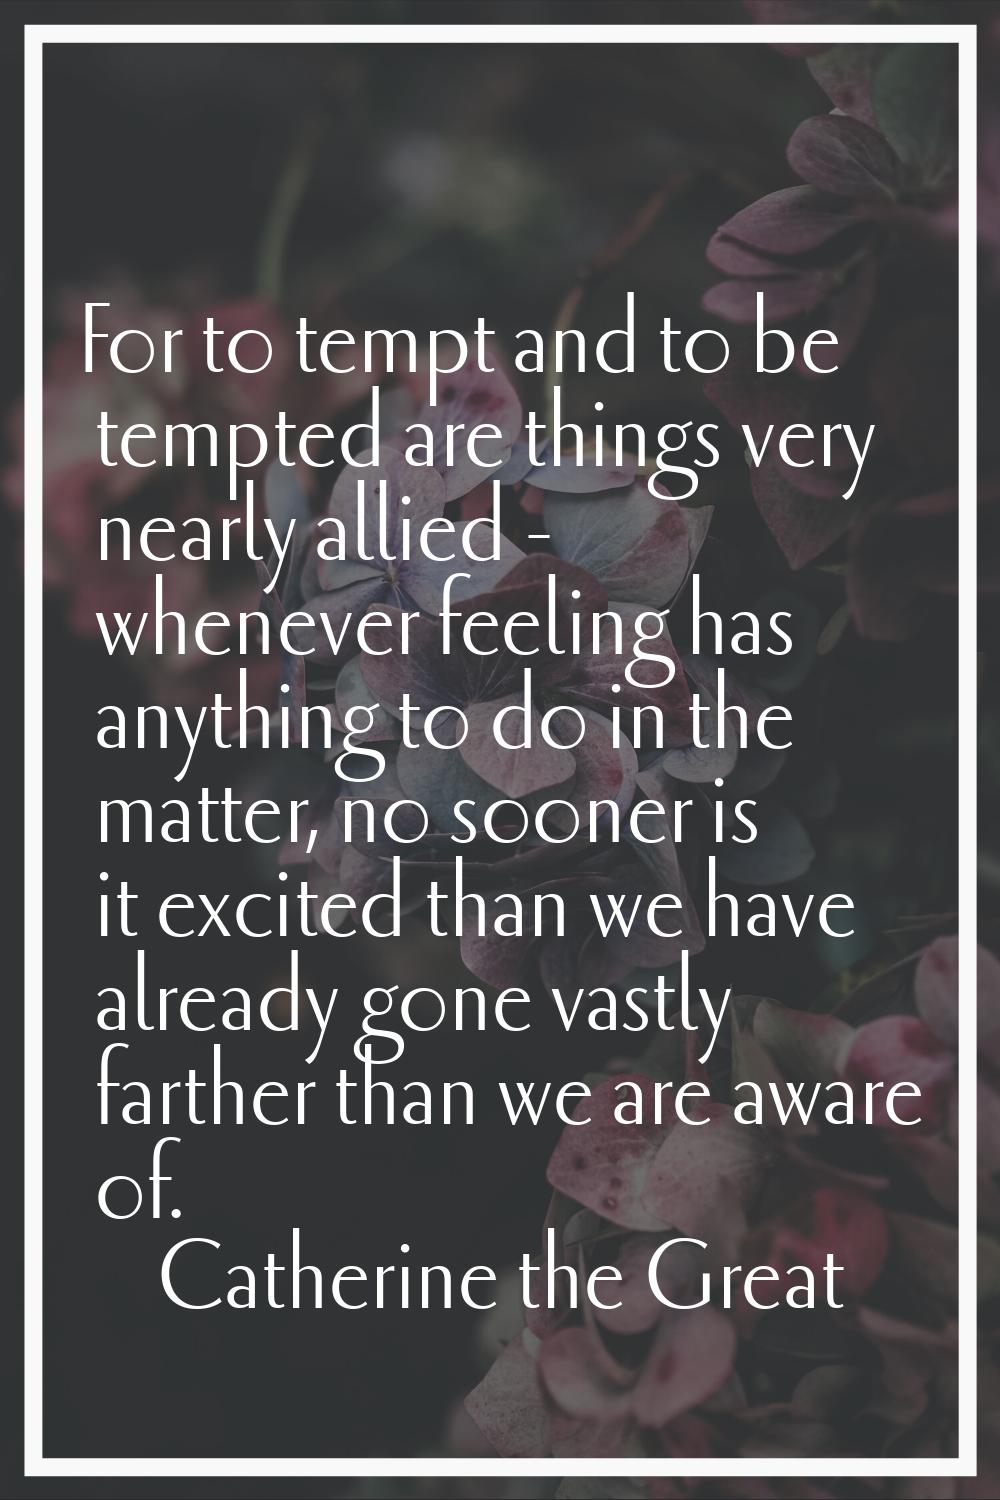 For to tempt and to be tempted are things very nearly allied - whenever feeling has anything to do 